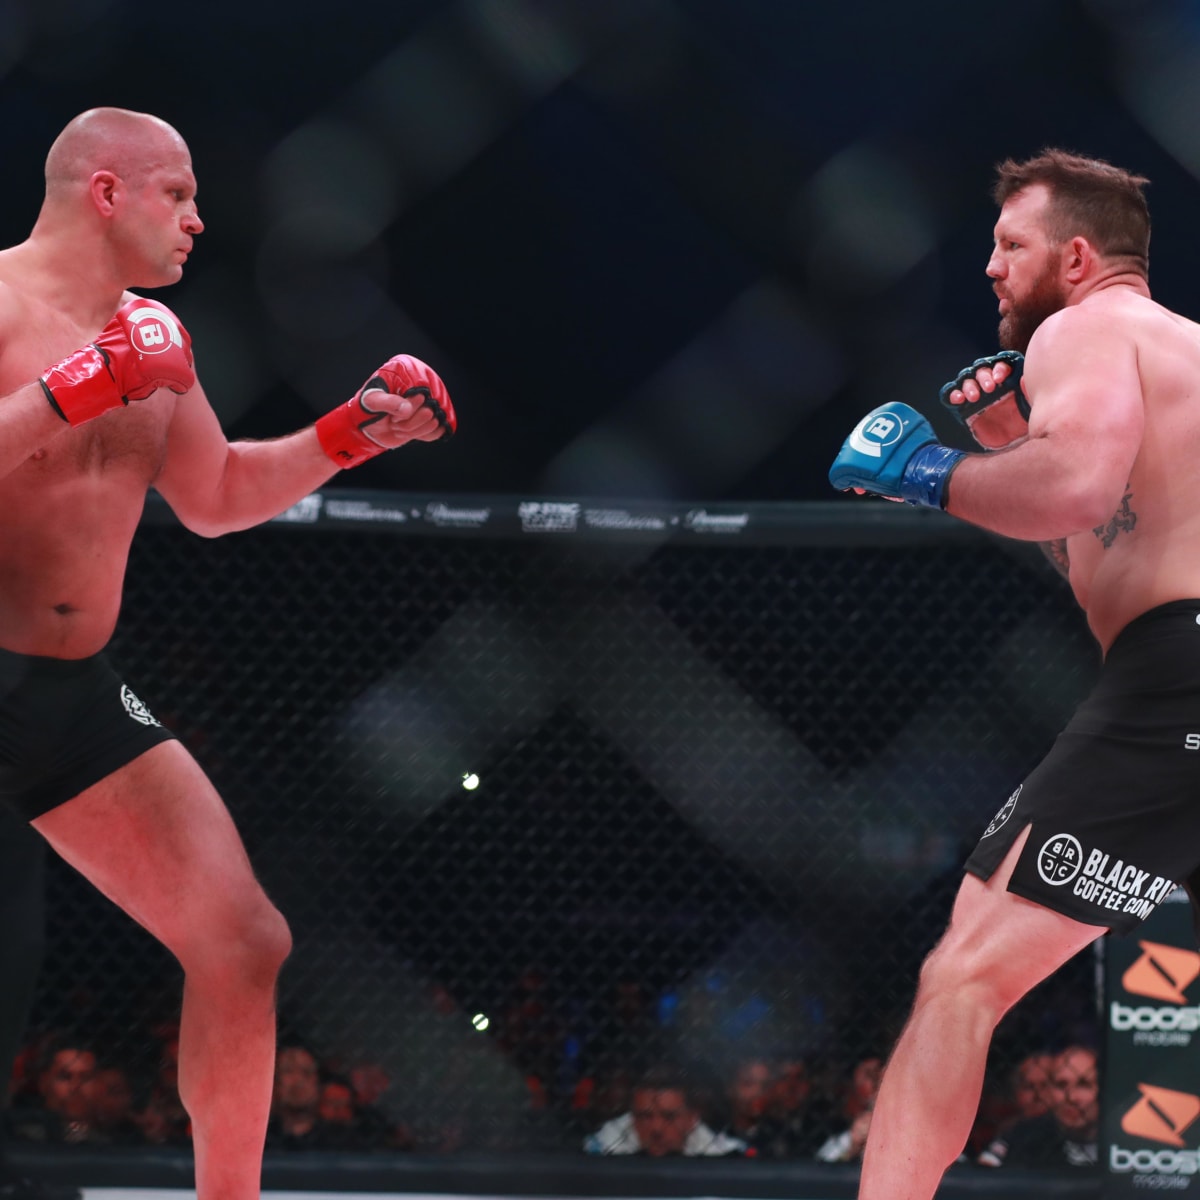 Watch Bellator 293 Golm vs James Stream MMA live, TV channel - How to Watch and Stream Major League and College Sports